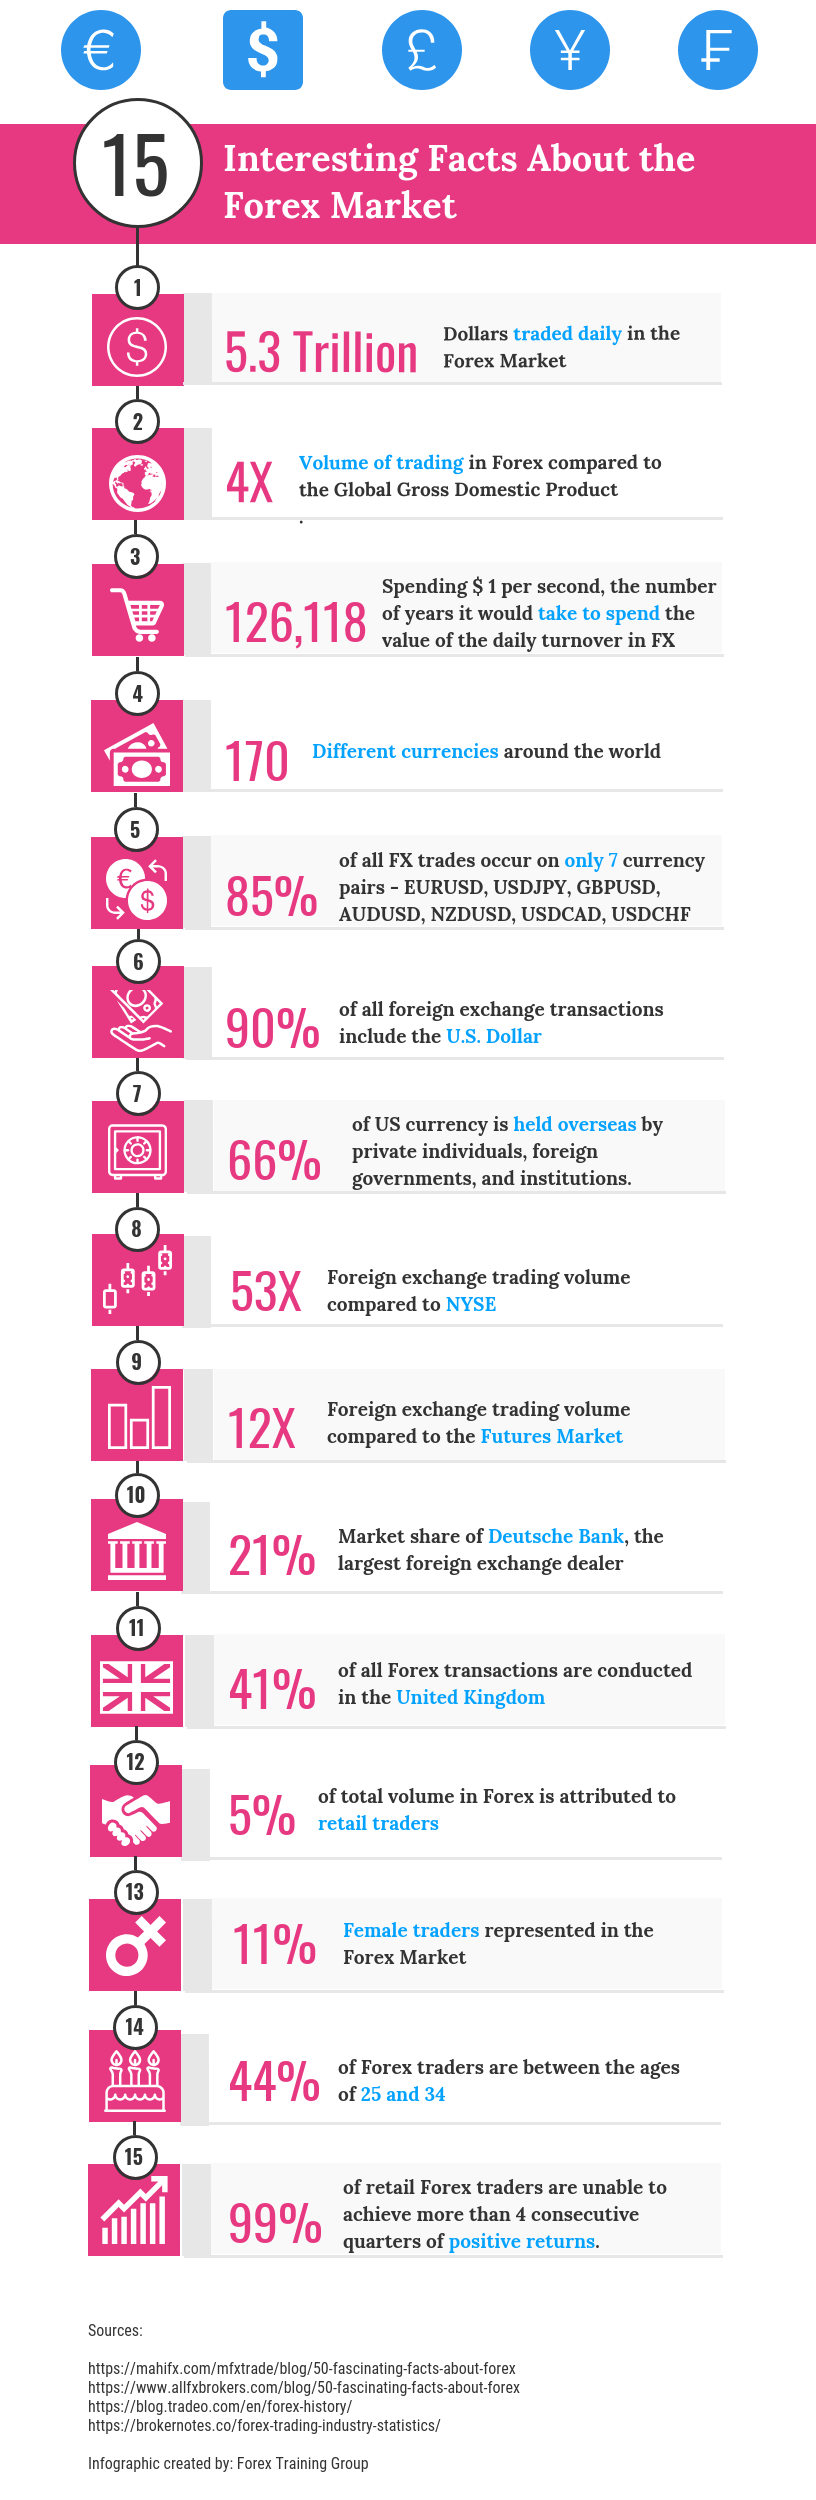 15 Interesting Facts About the Forex Market – Infographic